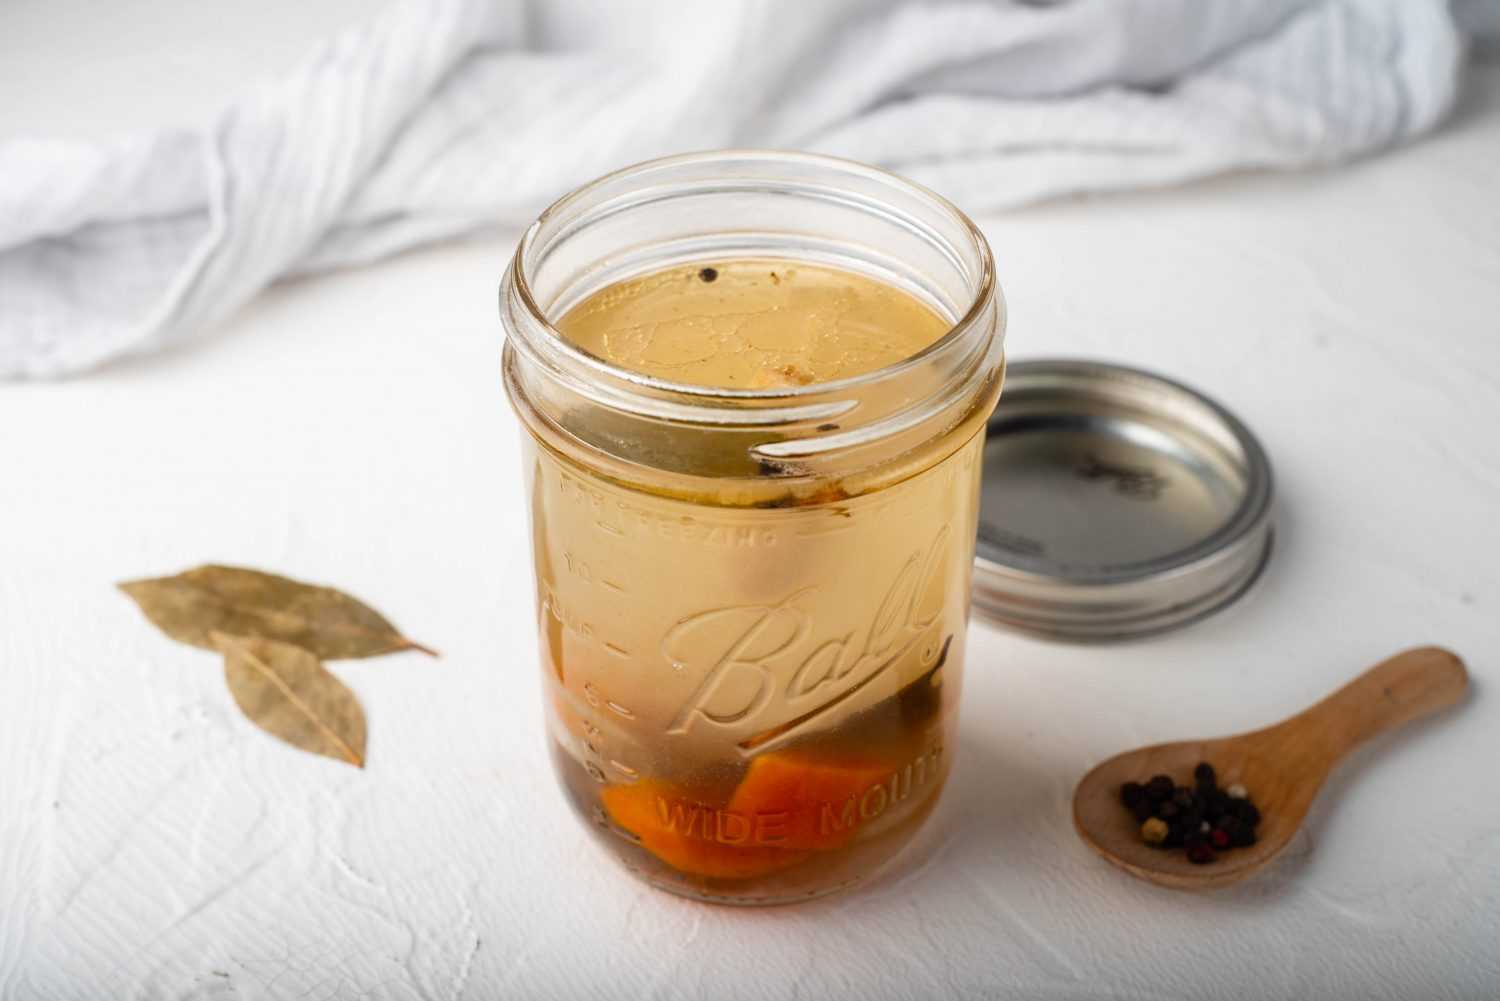 Bone broth in a jar with carrot and celery pieces on the bottom